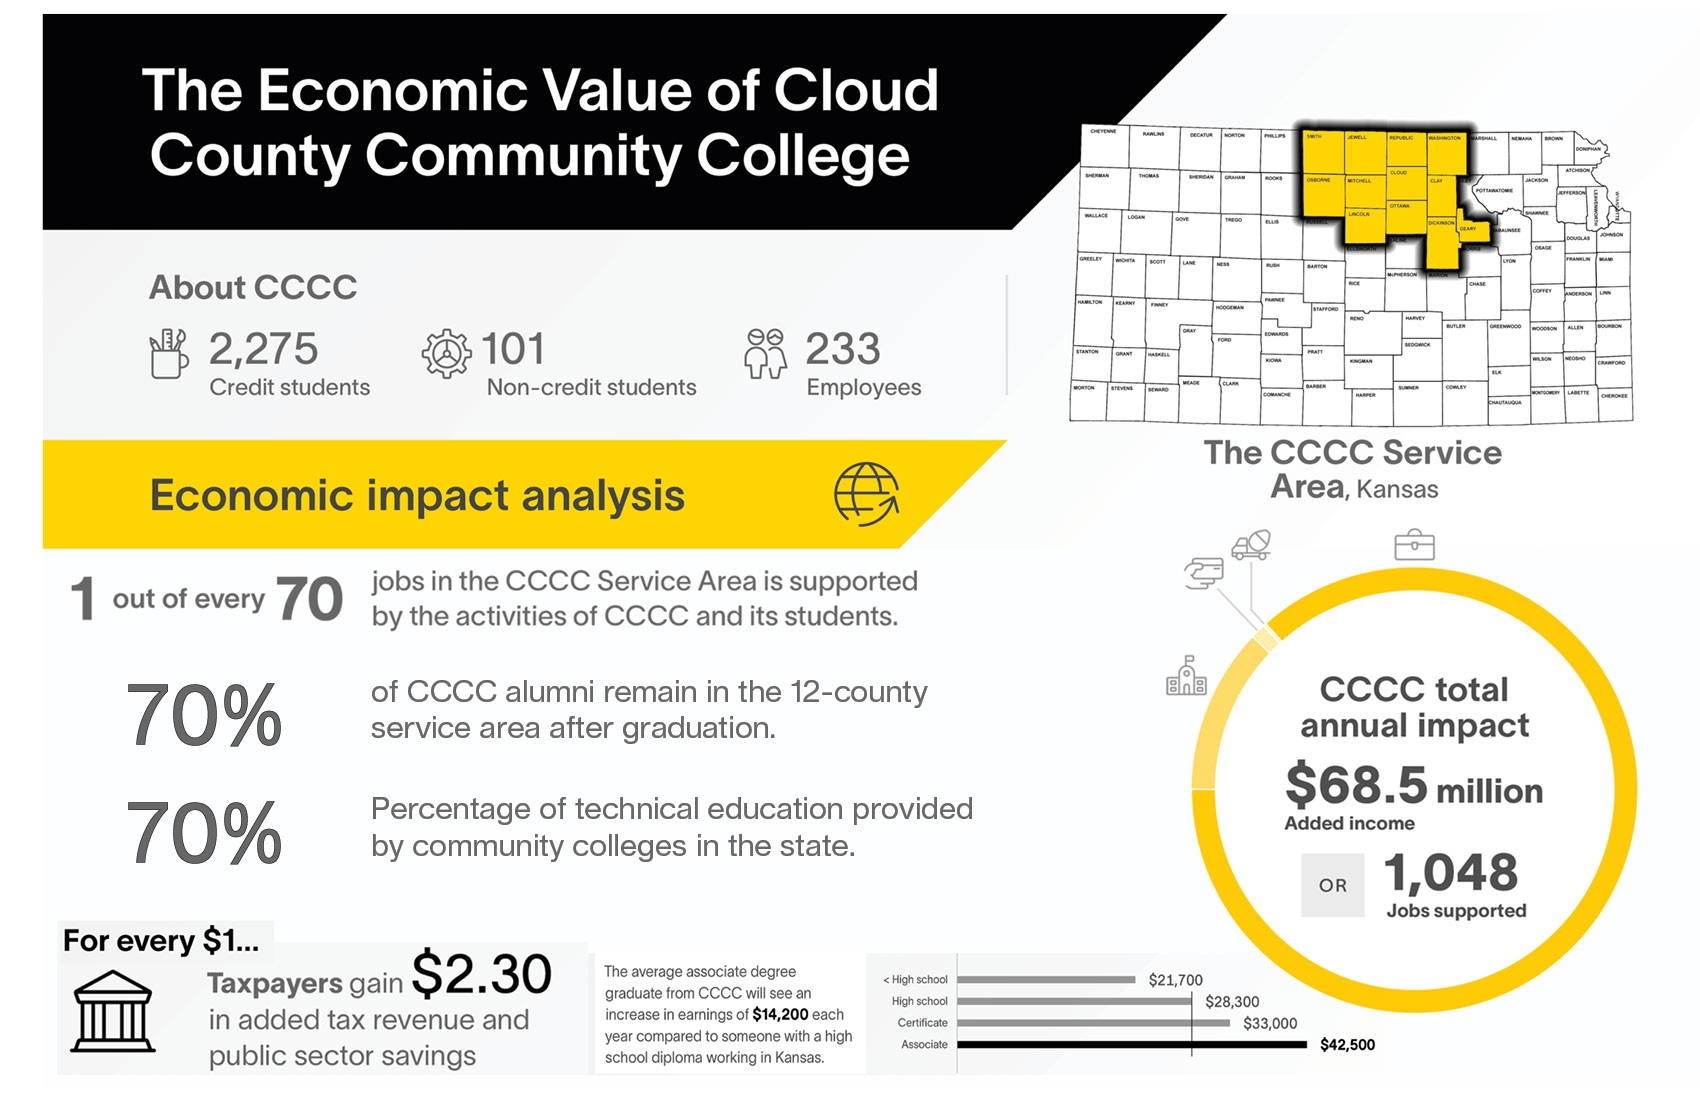 A photo of the economic value of CCCC.